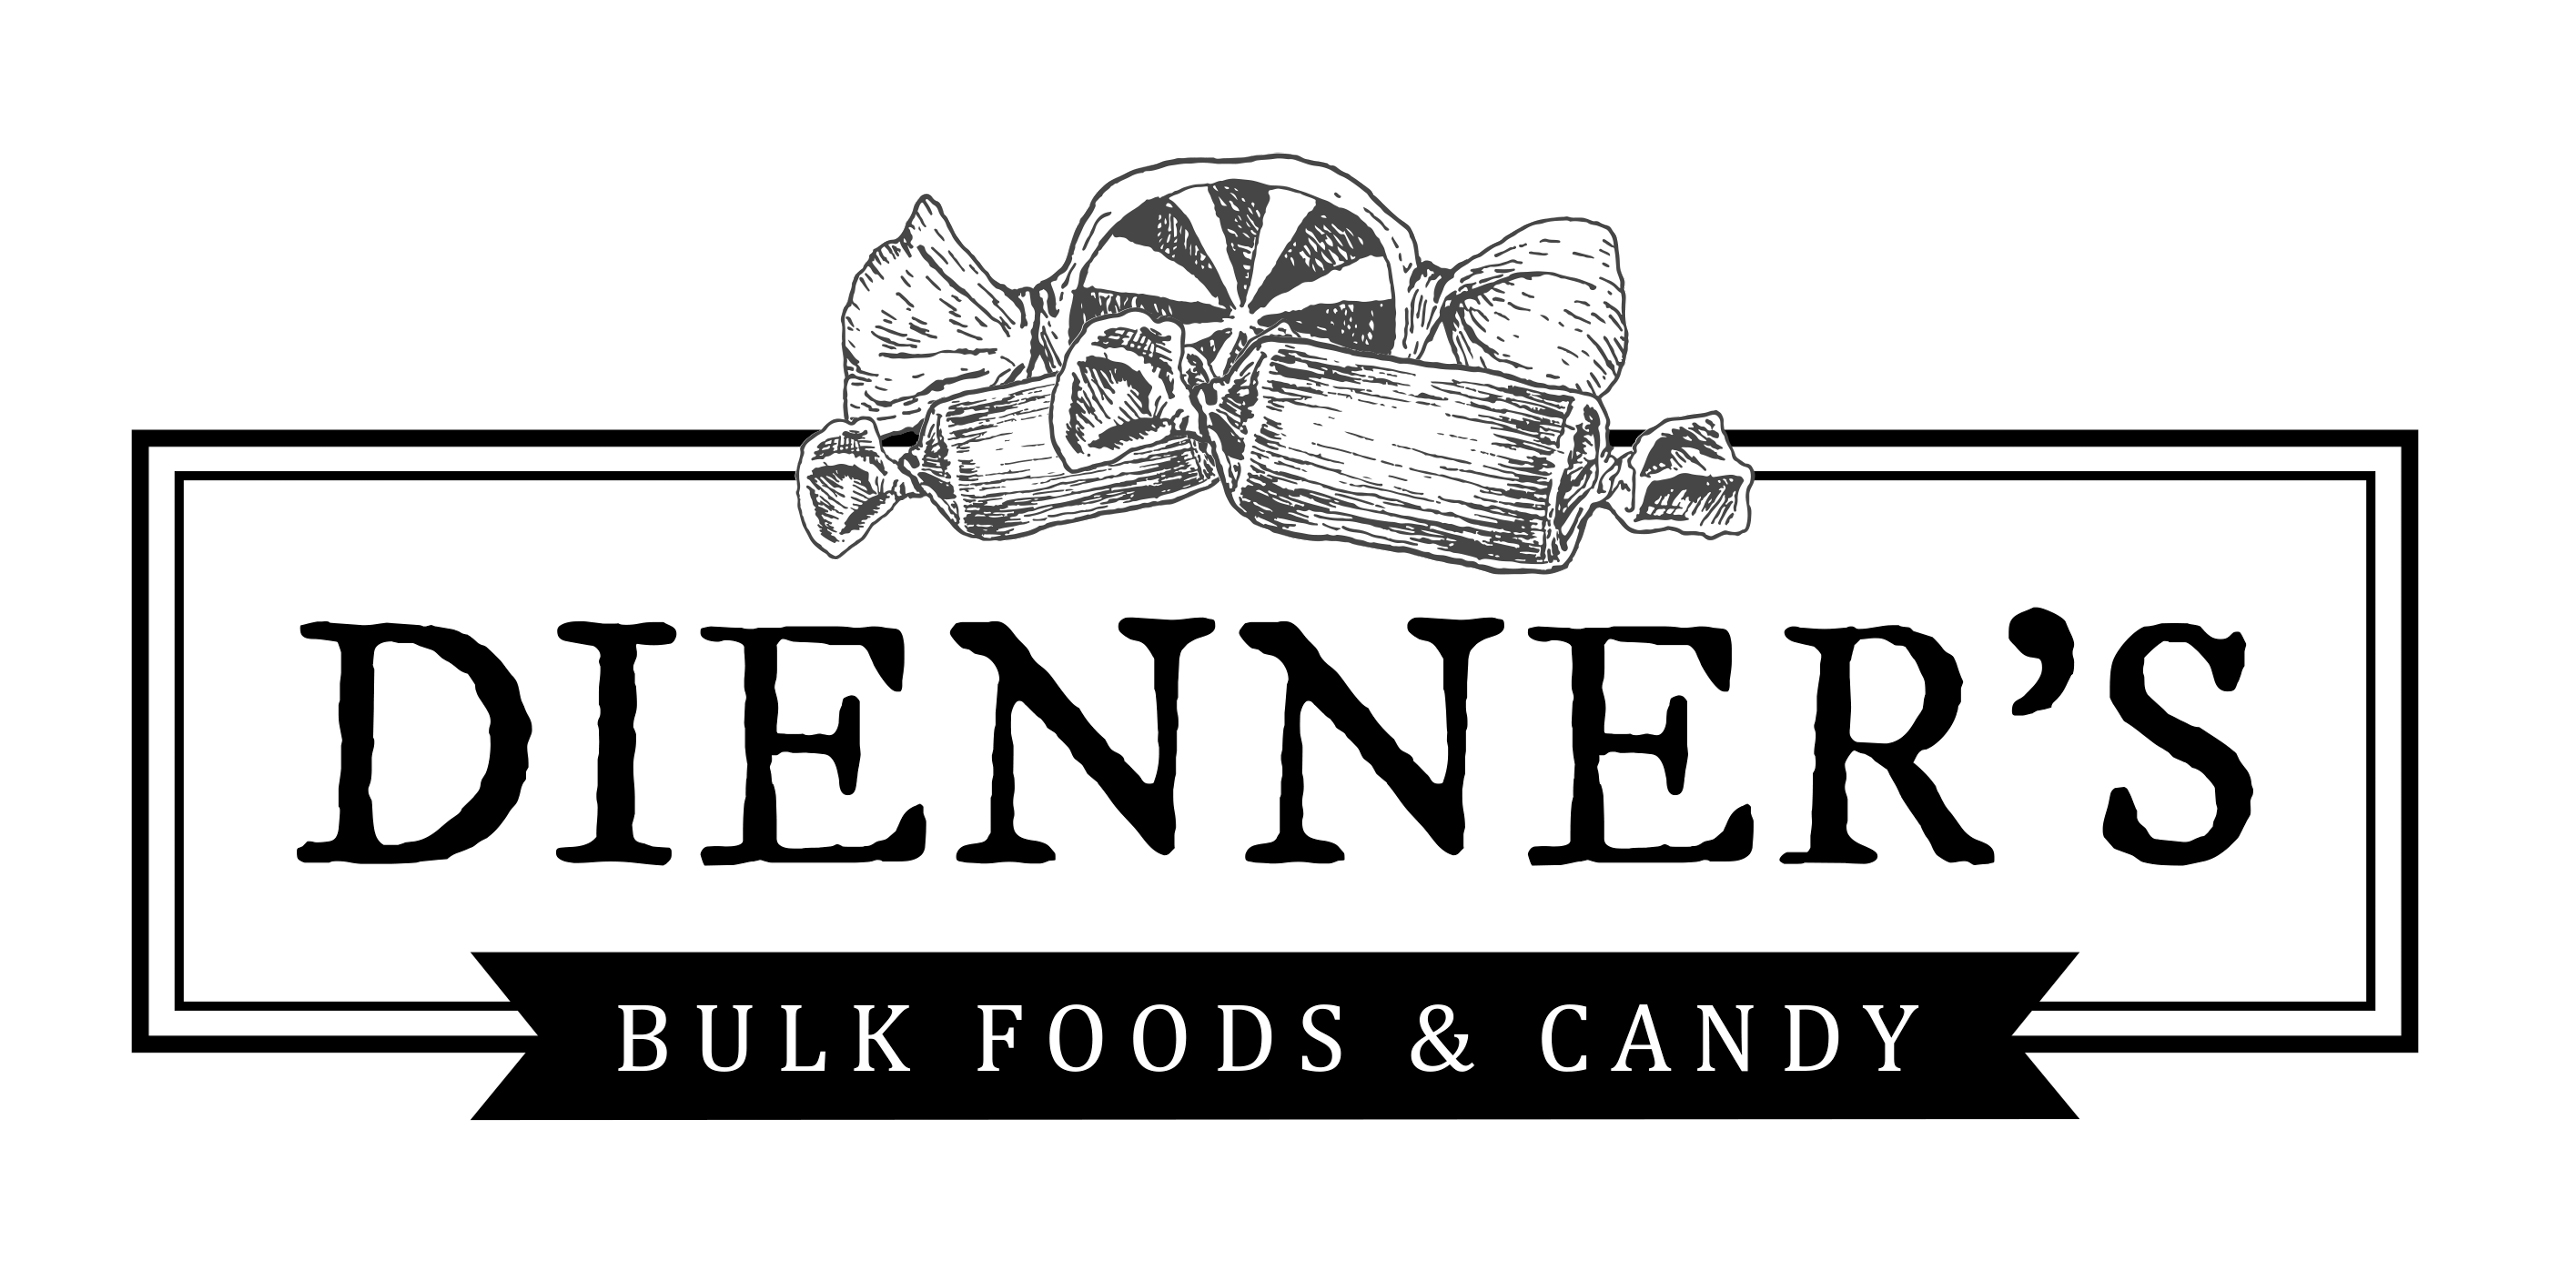 Dienners Bulk Foods and Candy Logo